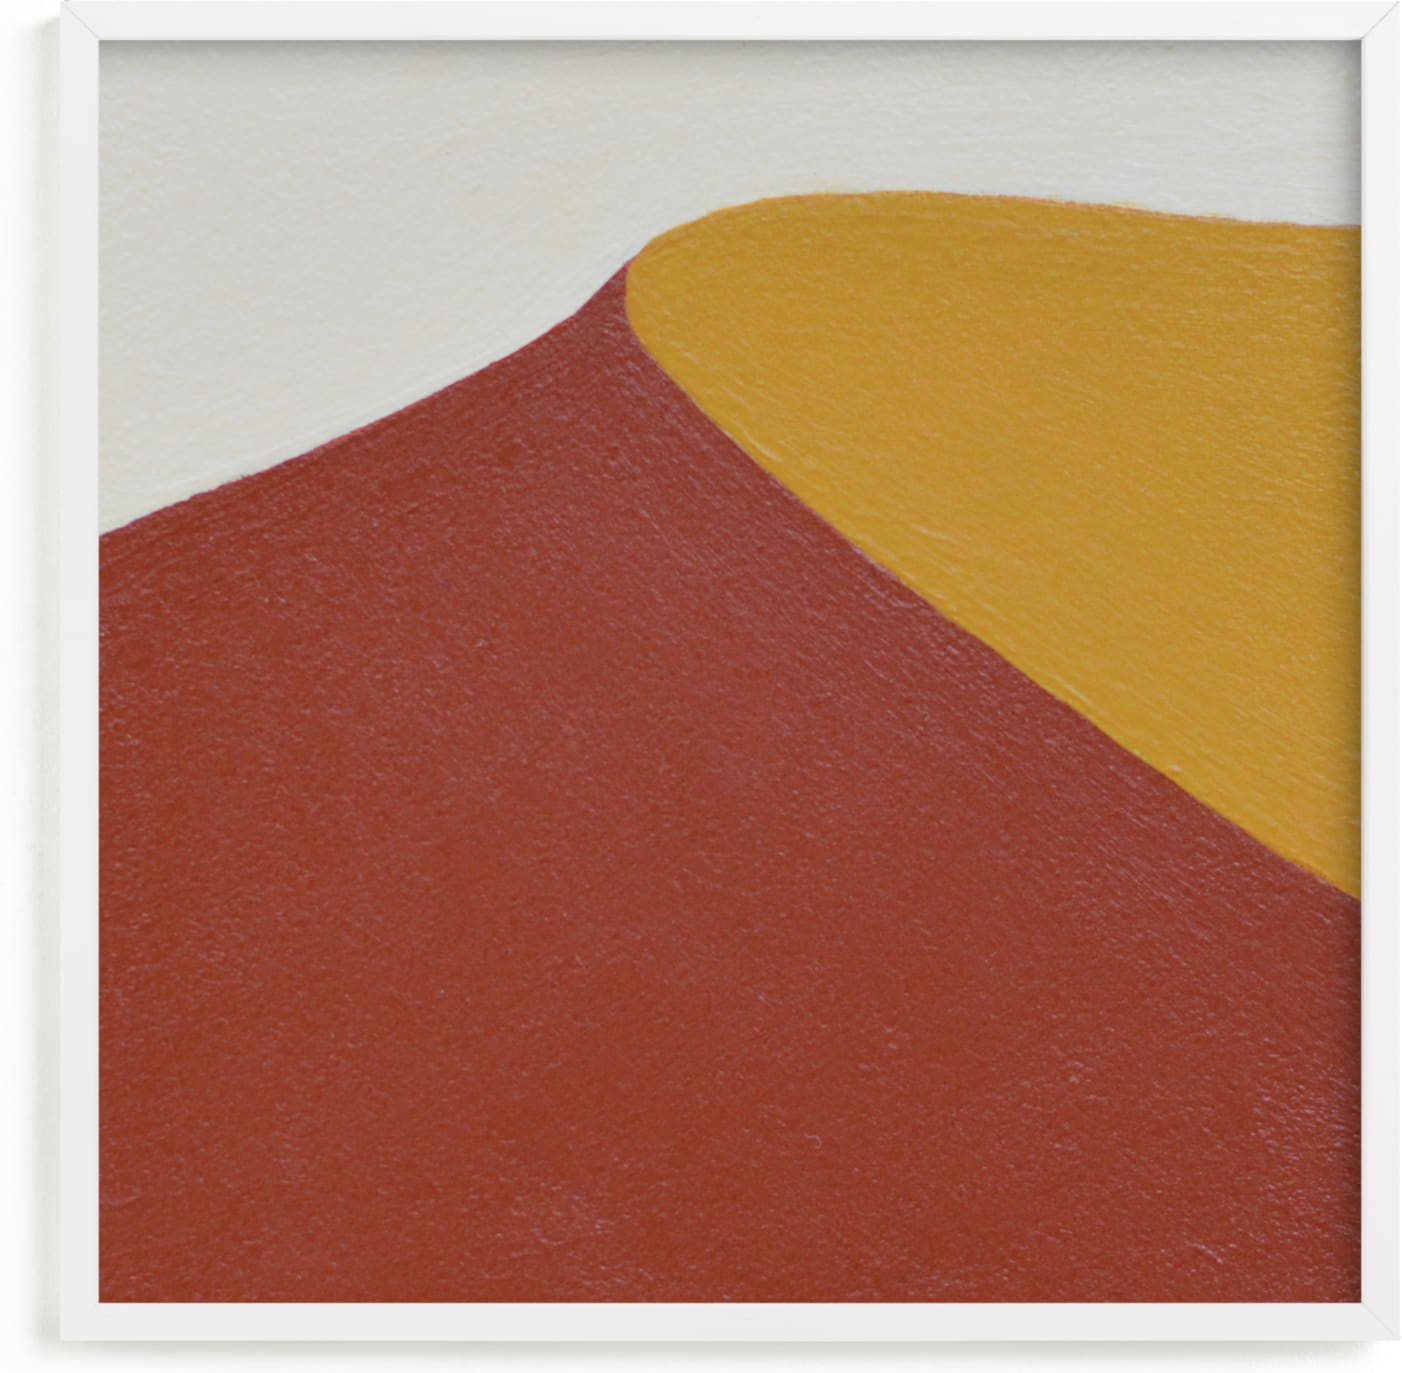 This is a yellow art by Alina Knechtle called Sam Sand Dunes III.